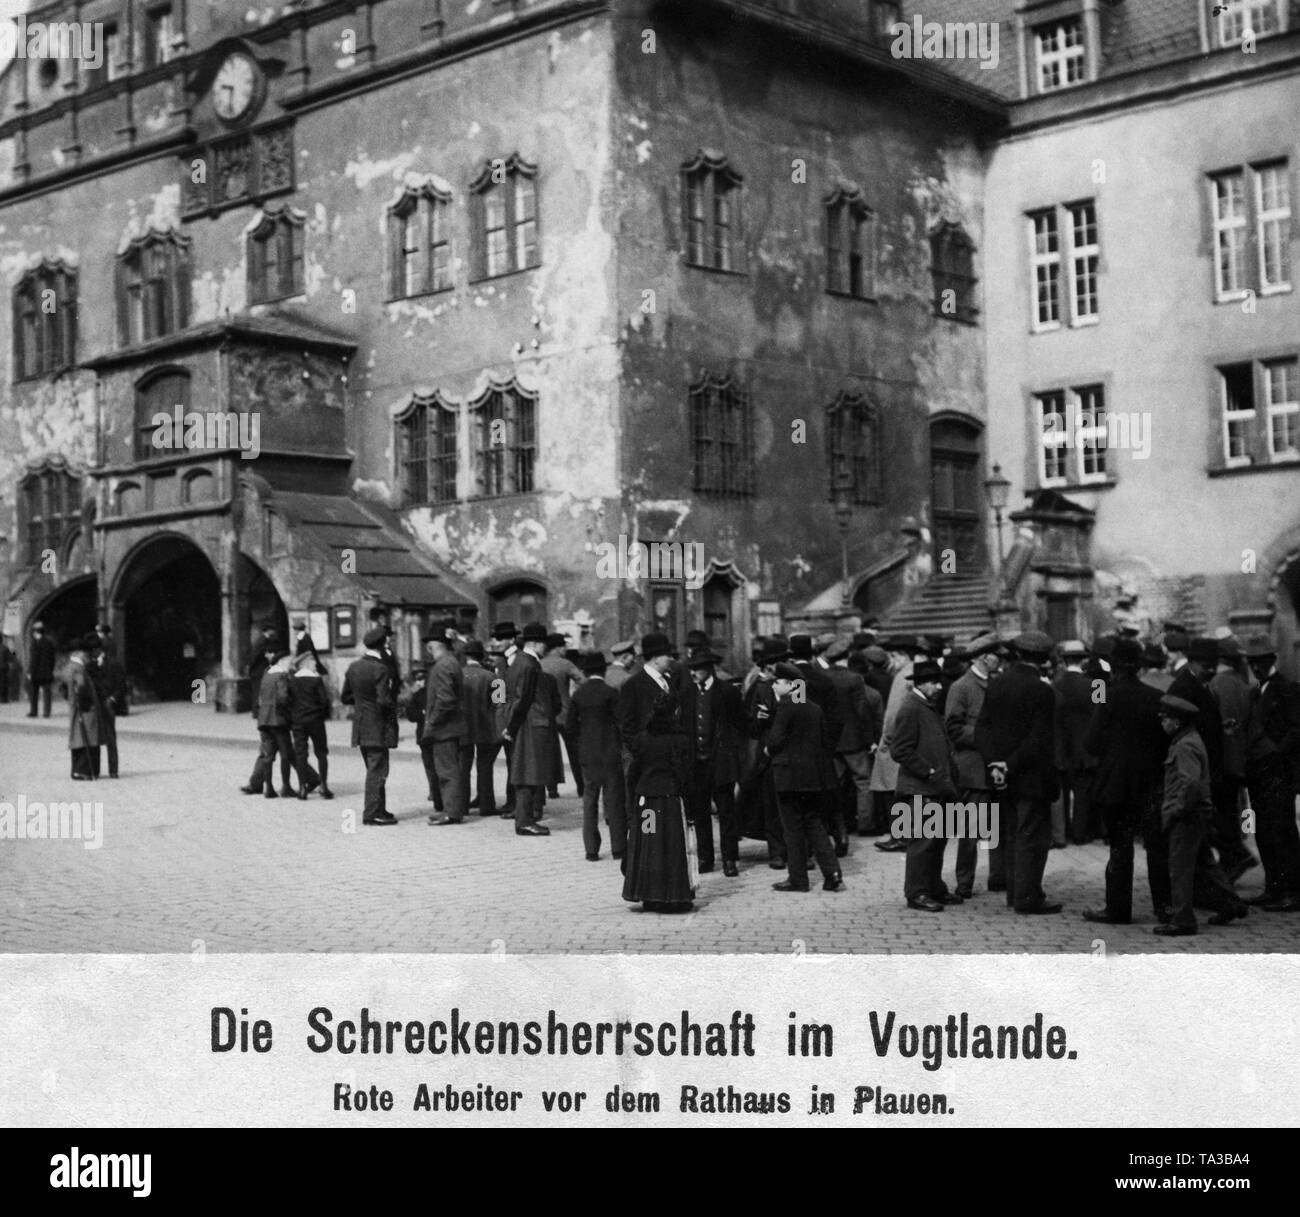 Armed workers of the Communist Red Army in front of the town hall in Plauen. Stock Photo